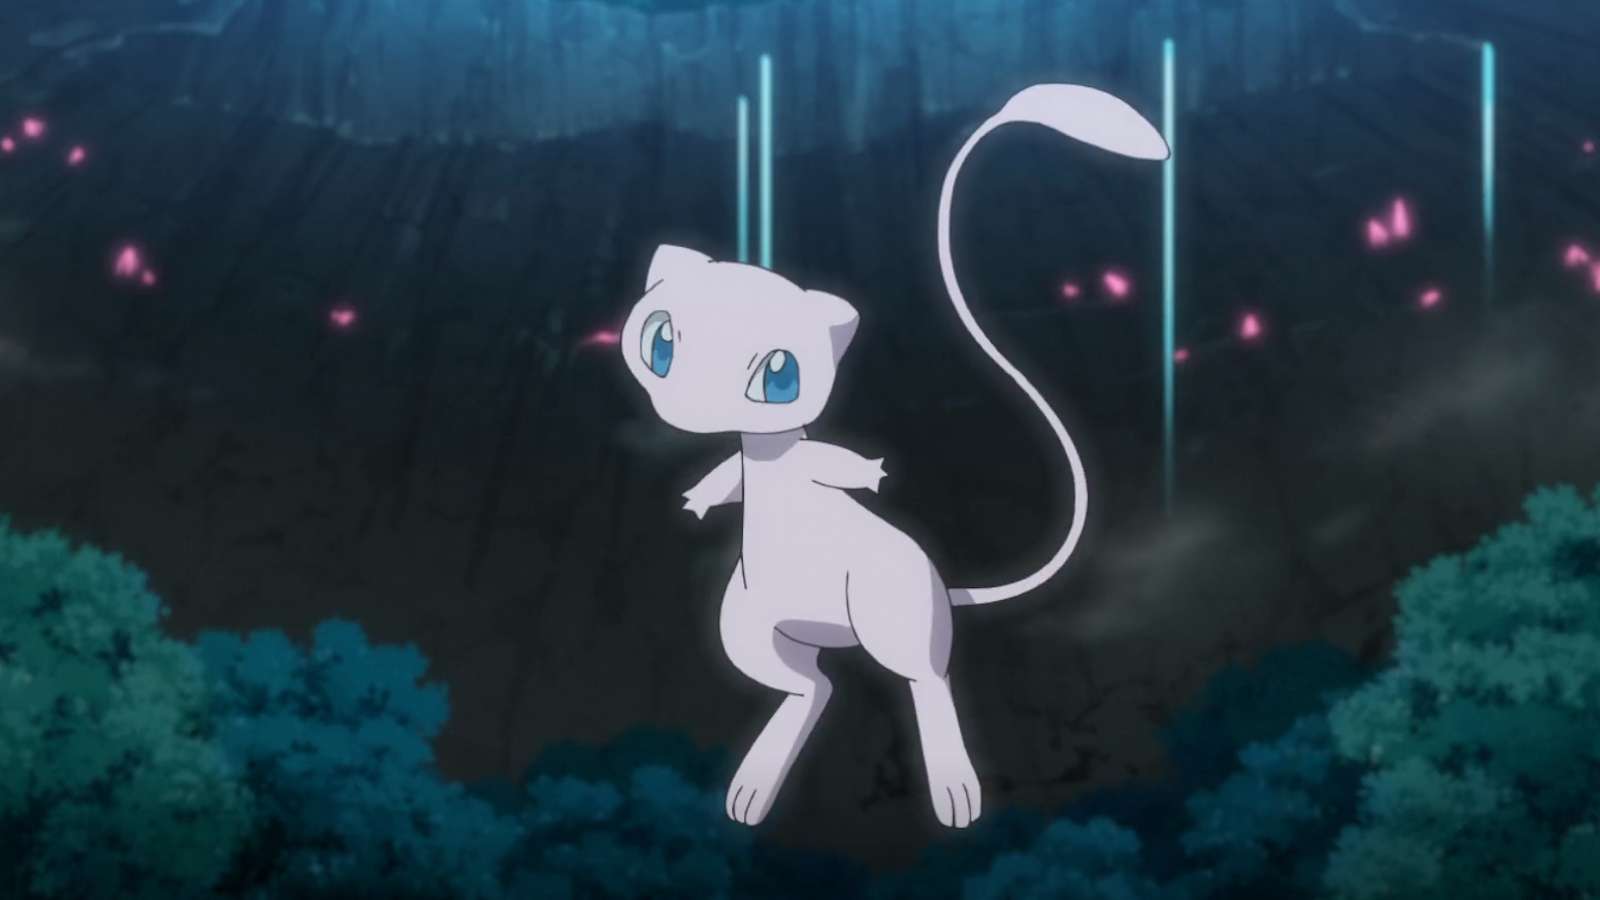 Mew about to battele Project Mew team in Pokemon Journeys anime.